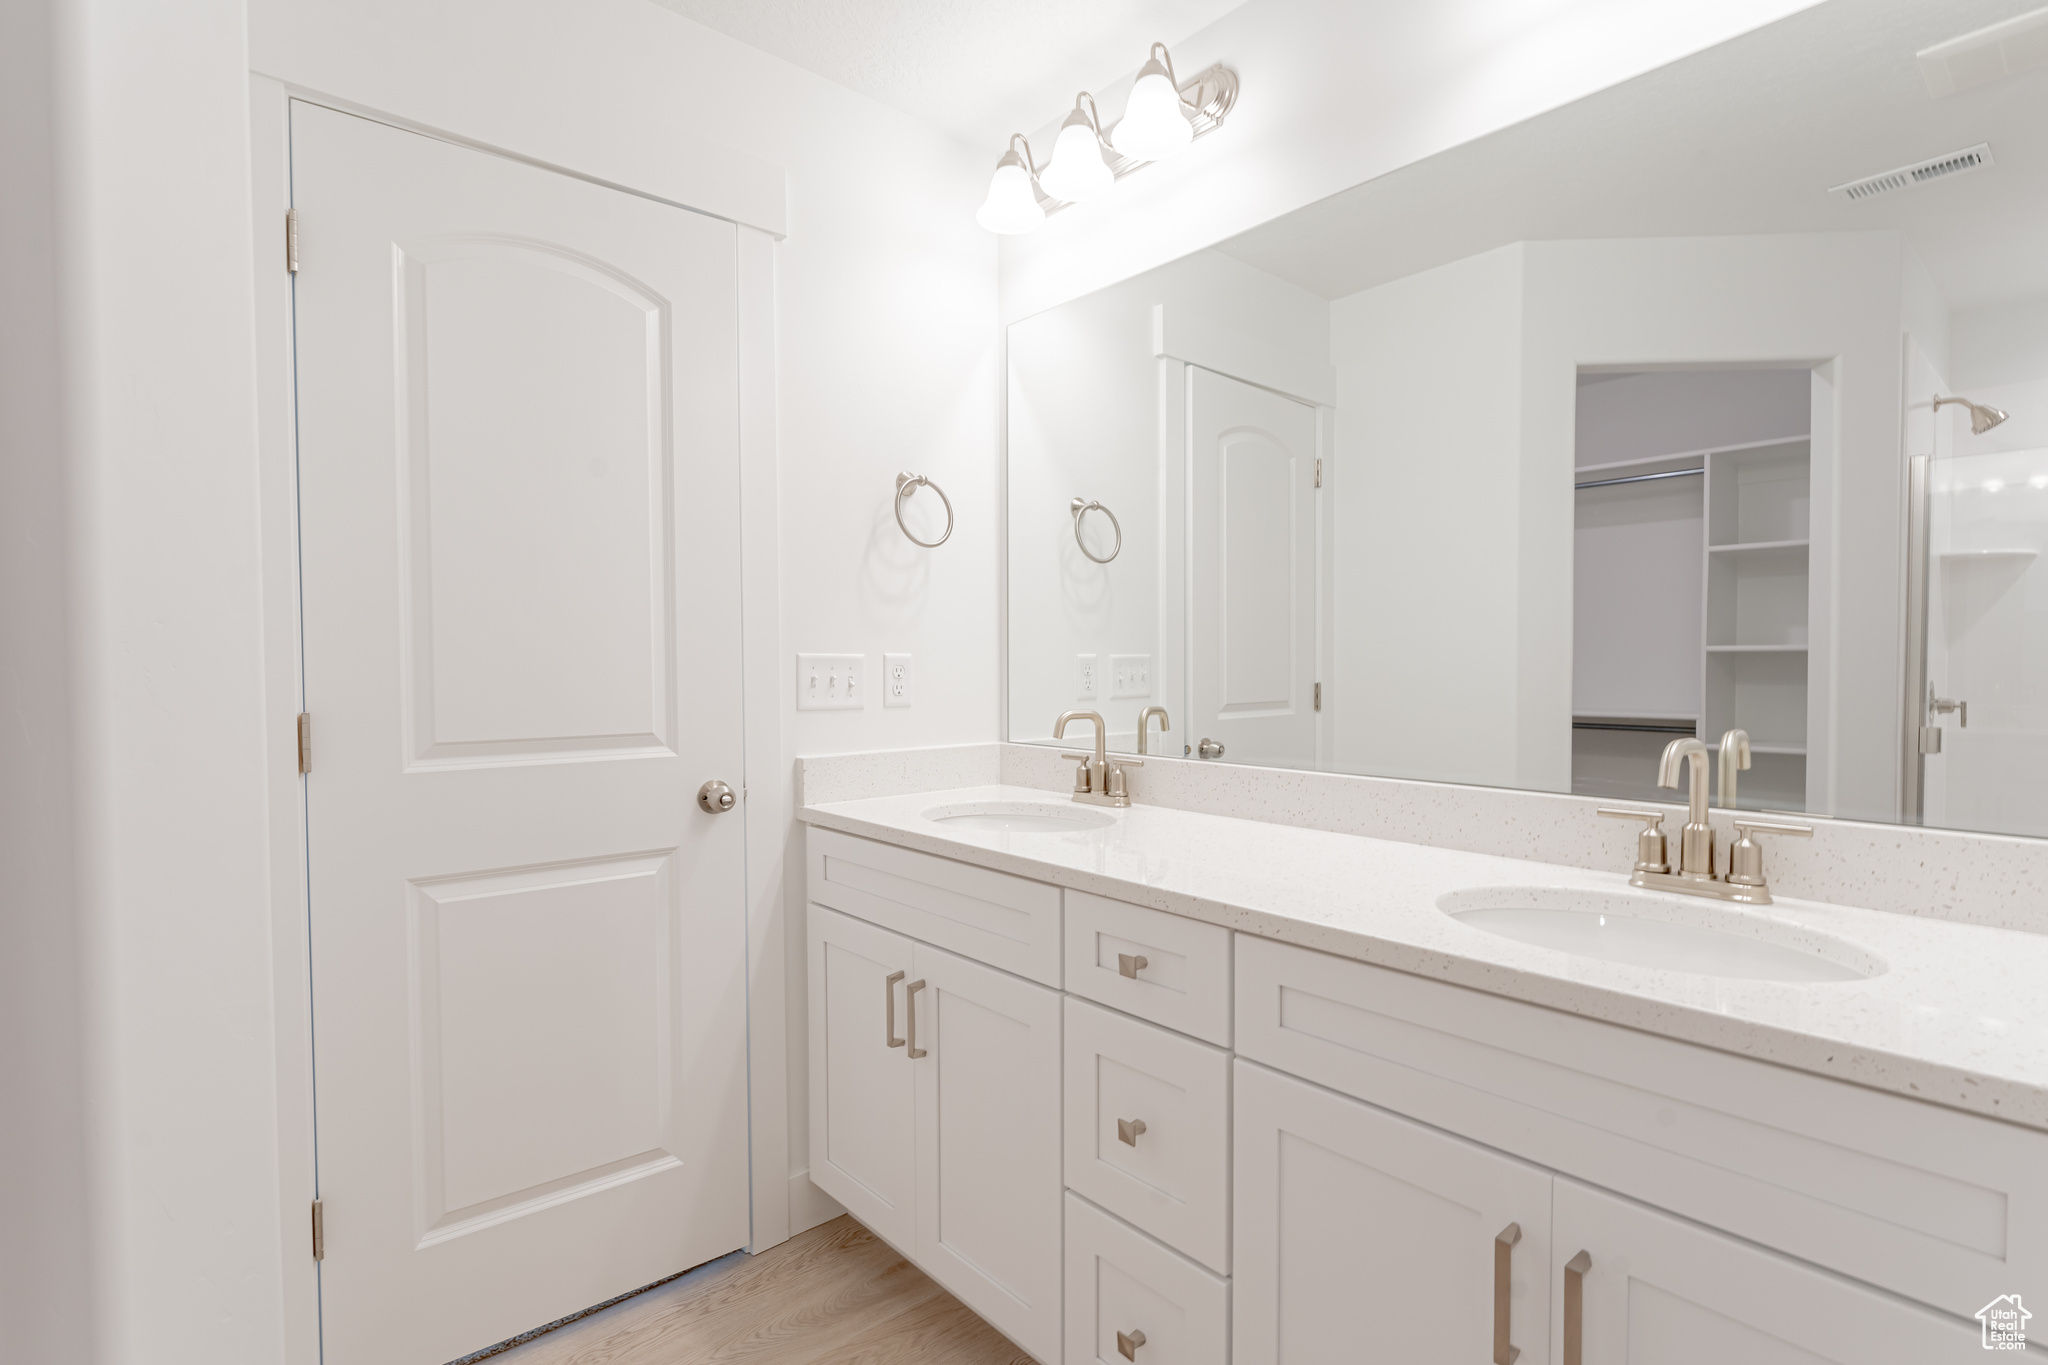 Bathroom with dual sinks, vanity with extensive cabinet space, and hardwood / wood-style flooring